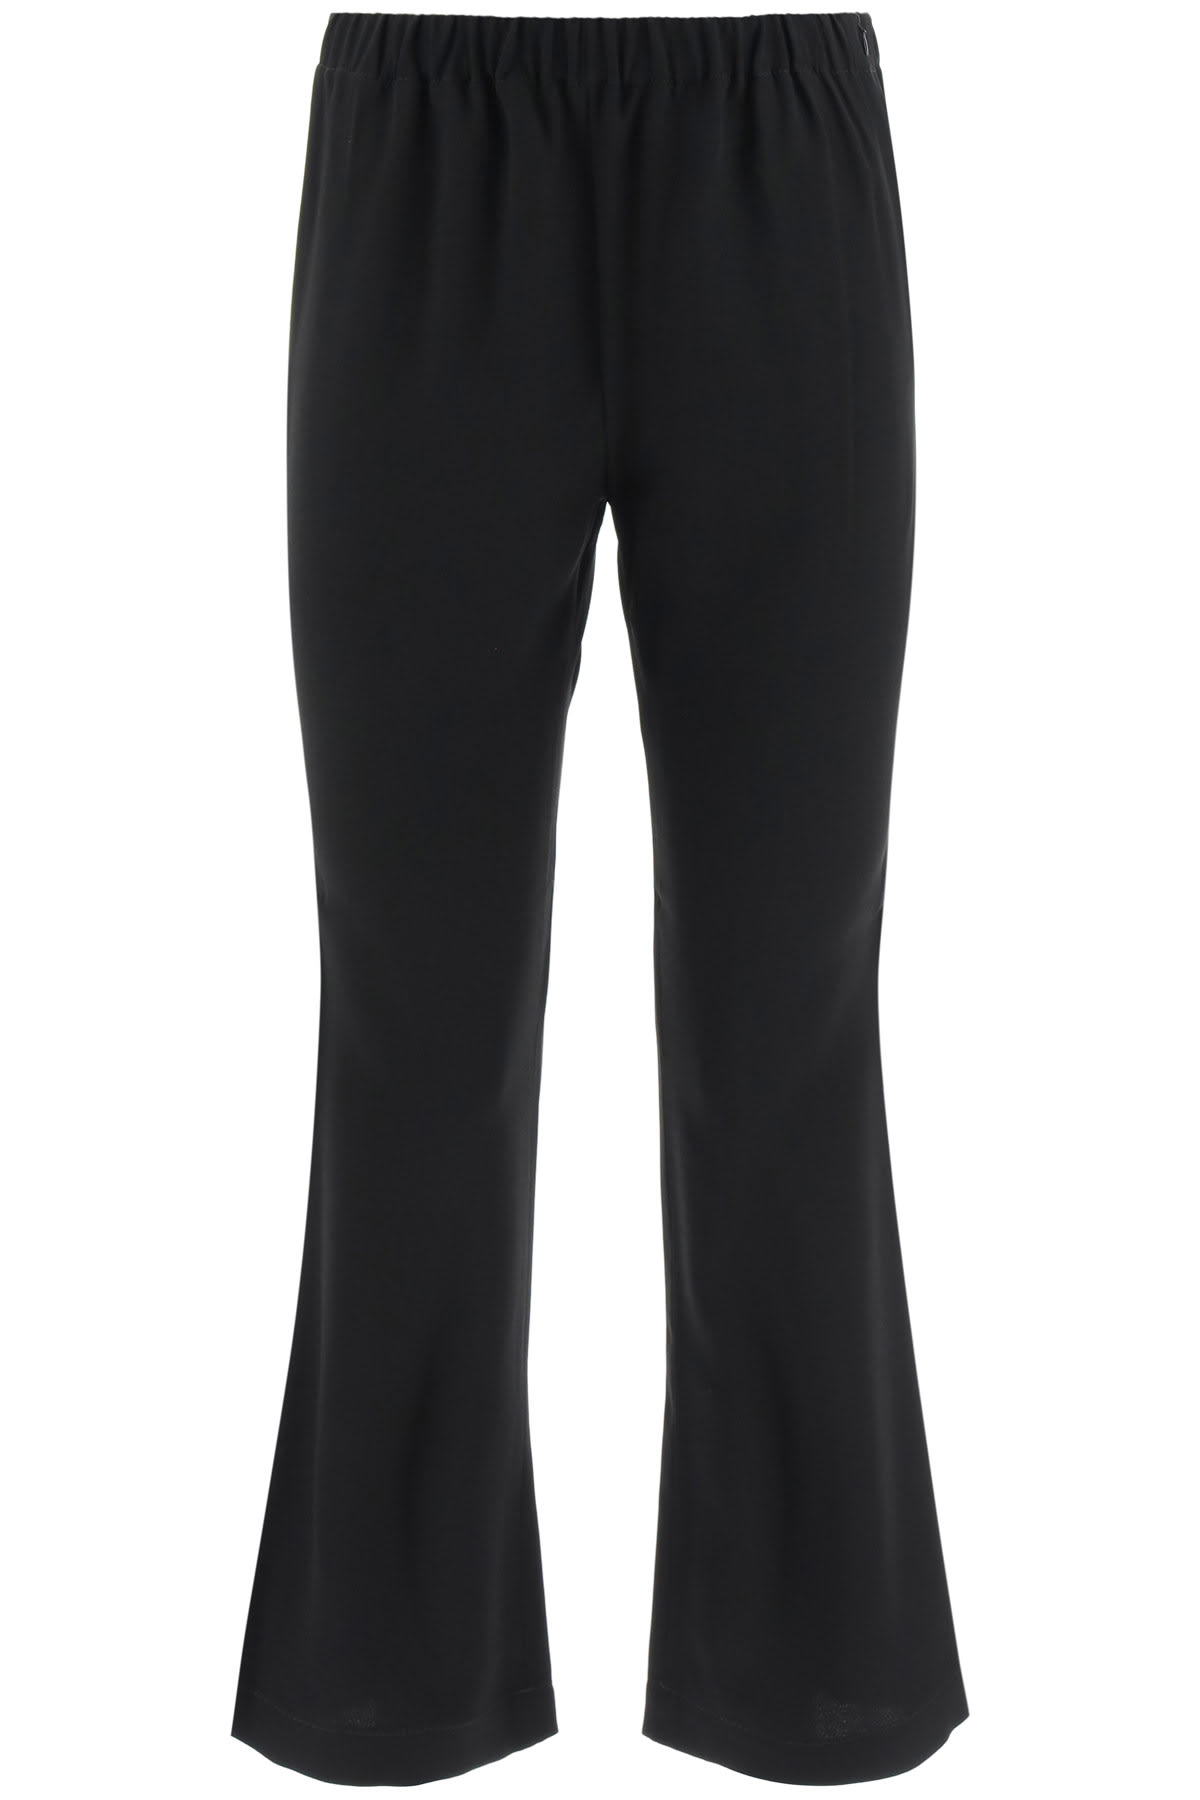 Marni Sports Trousers In Cady